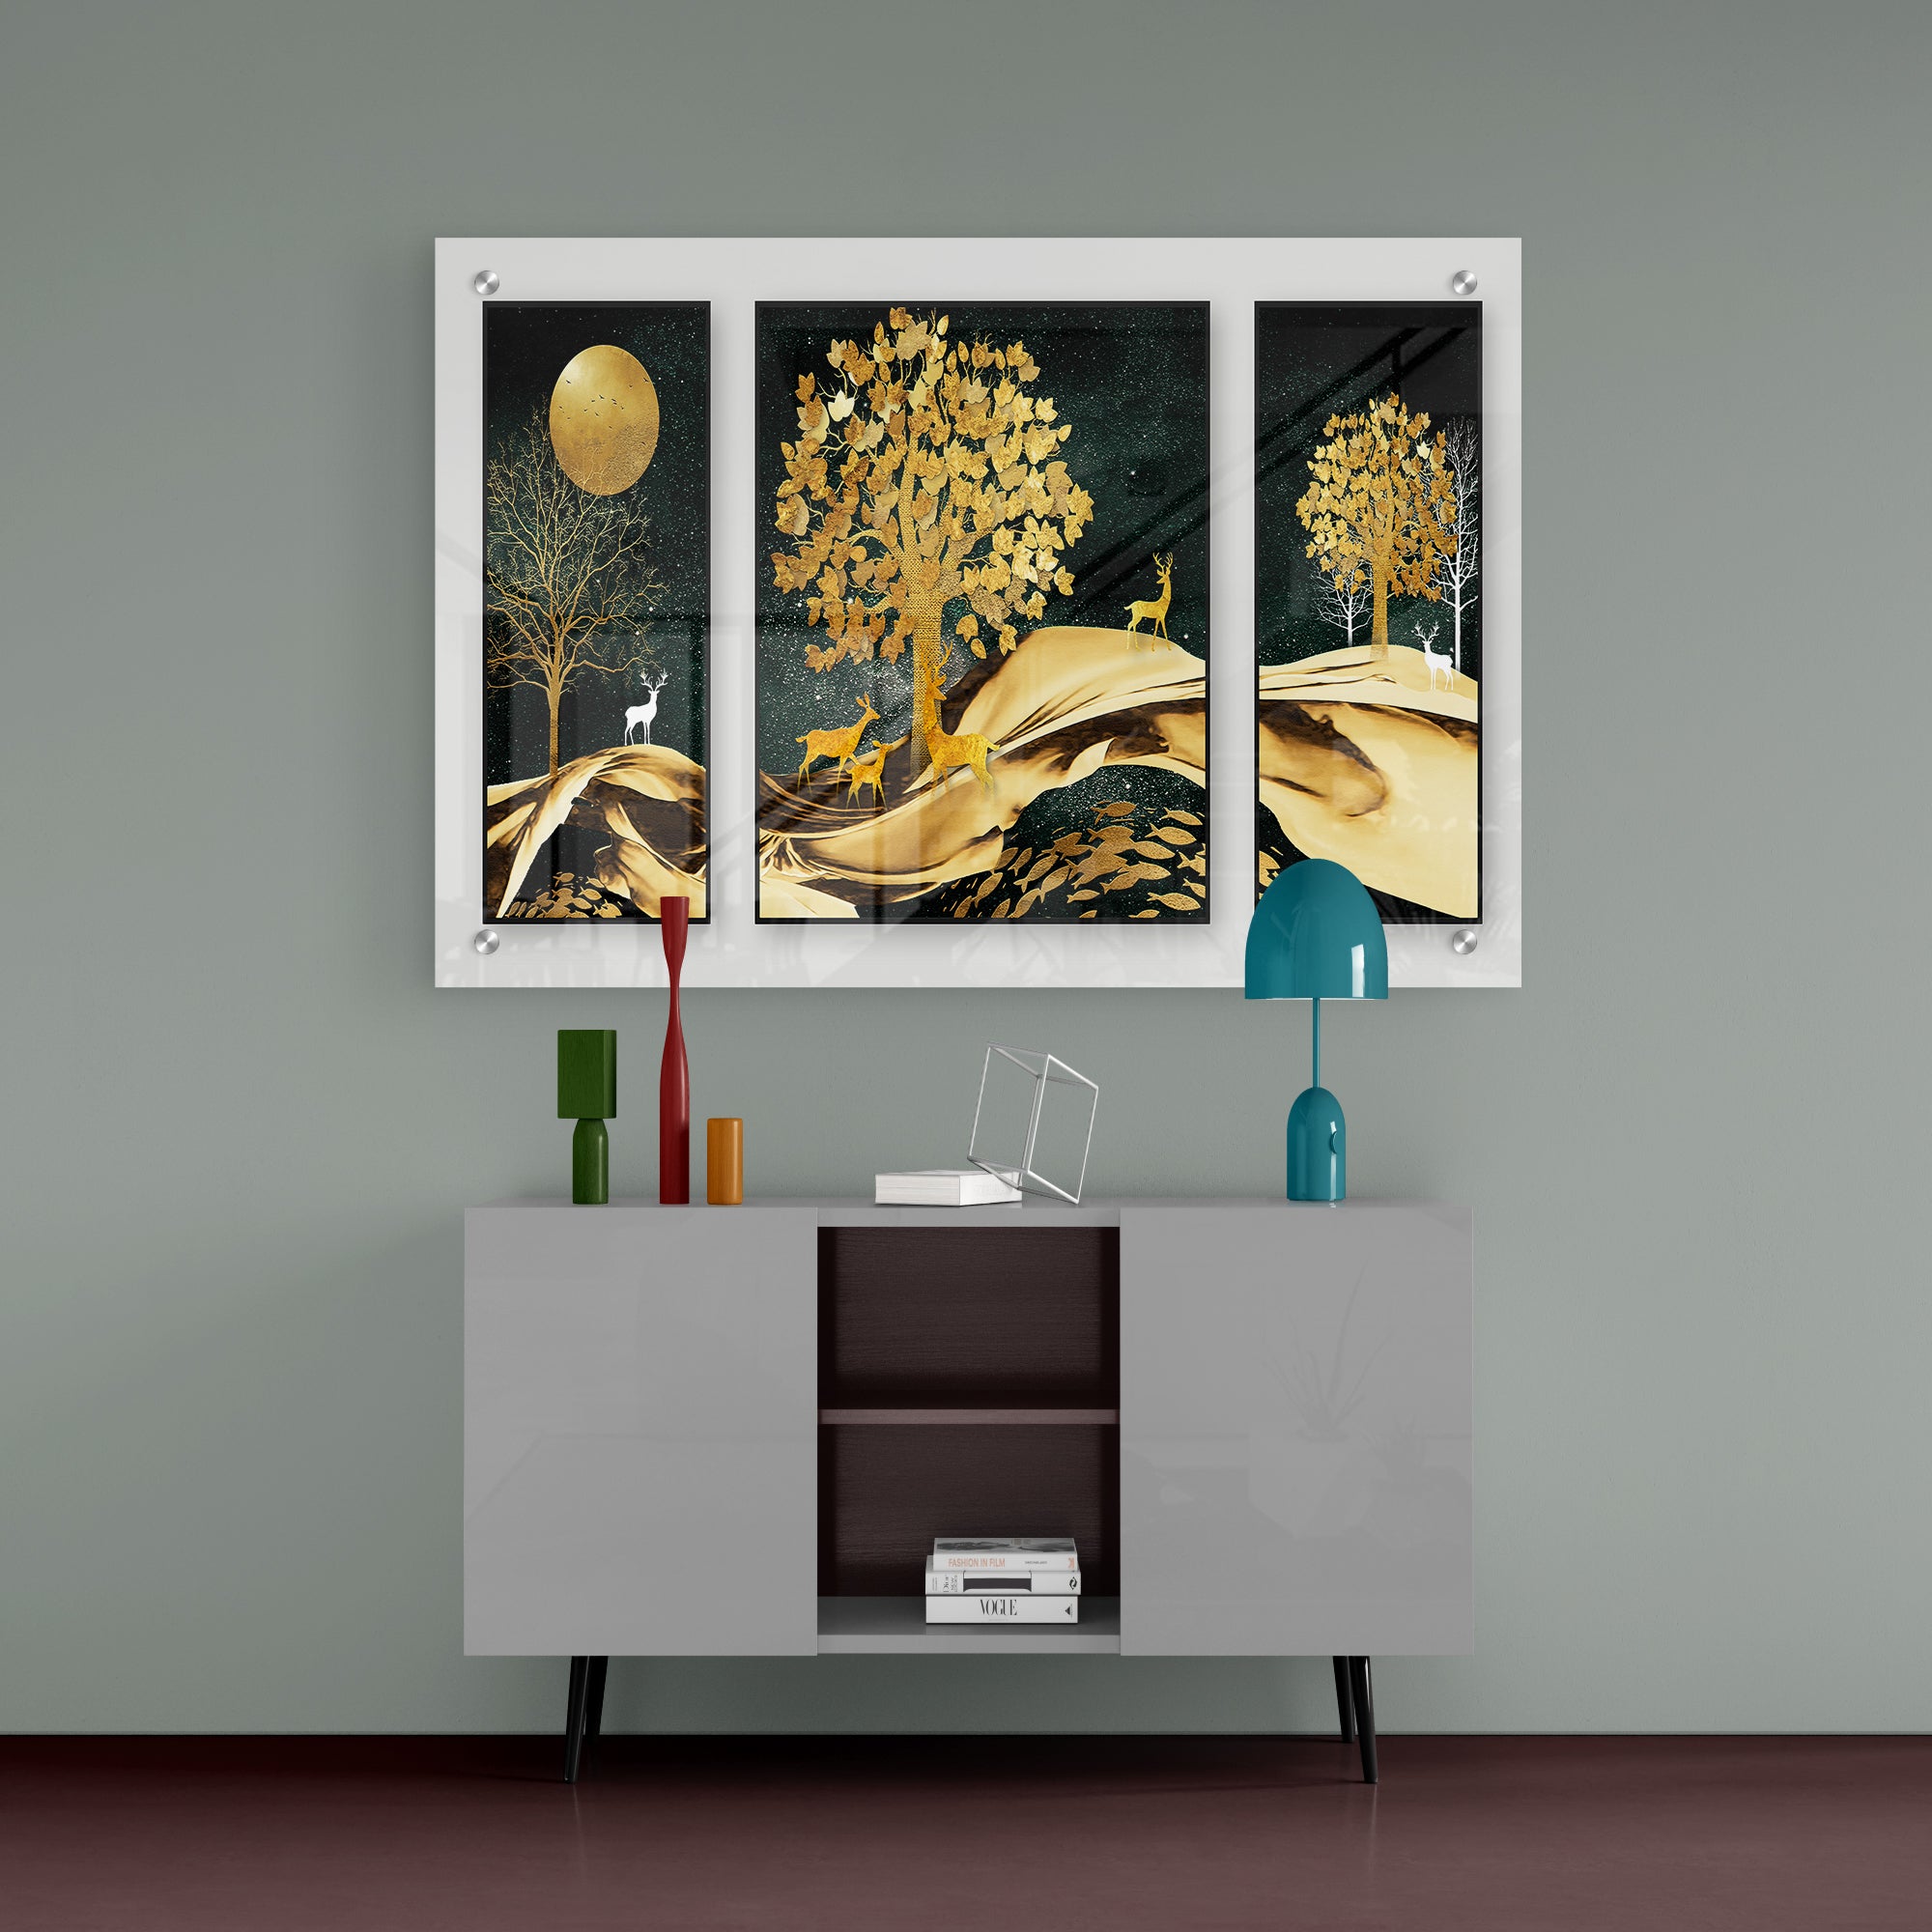 Golden Mountain And Tree With Deer And Fish Acrylic Wall Painting